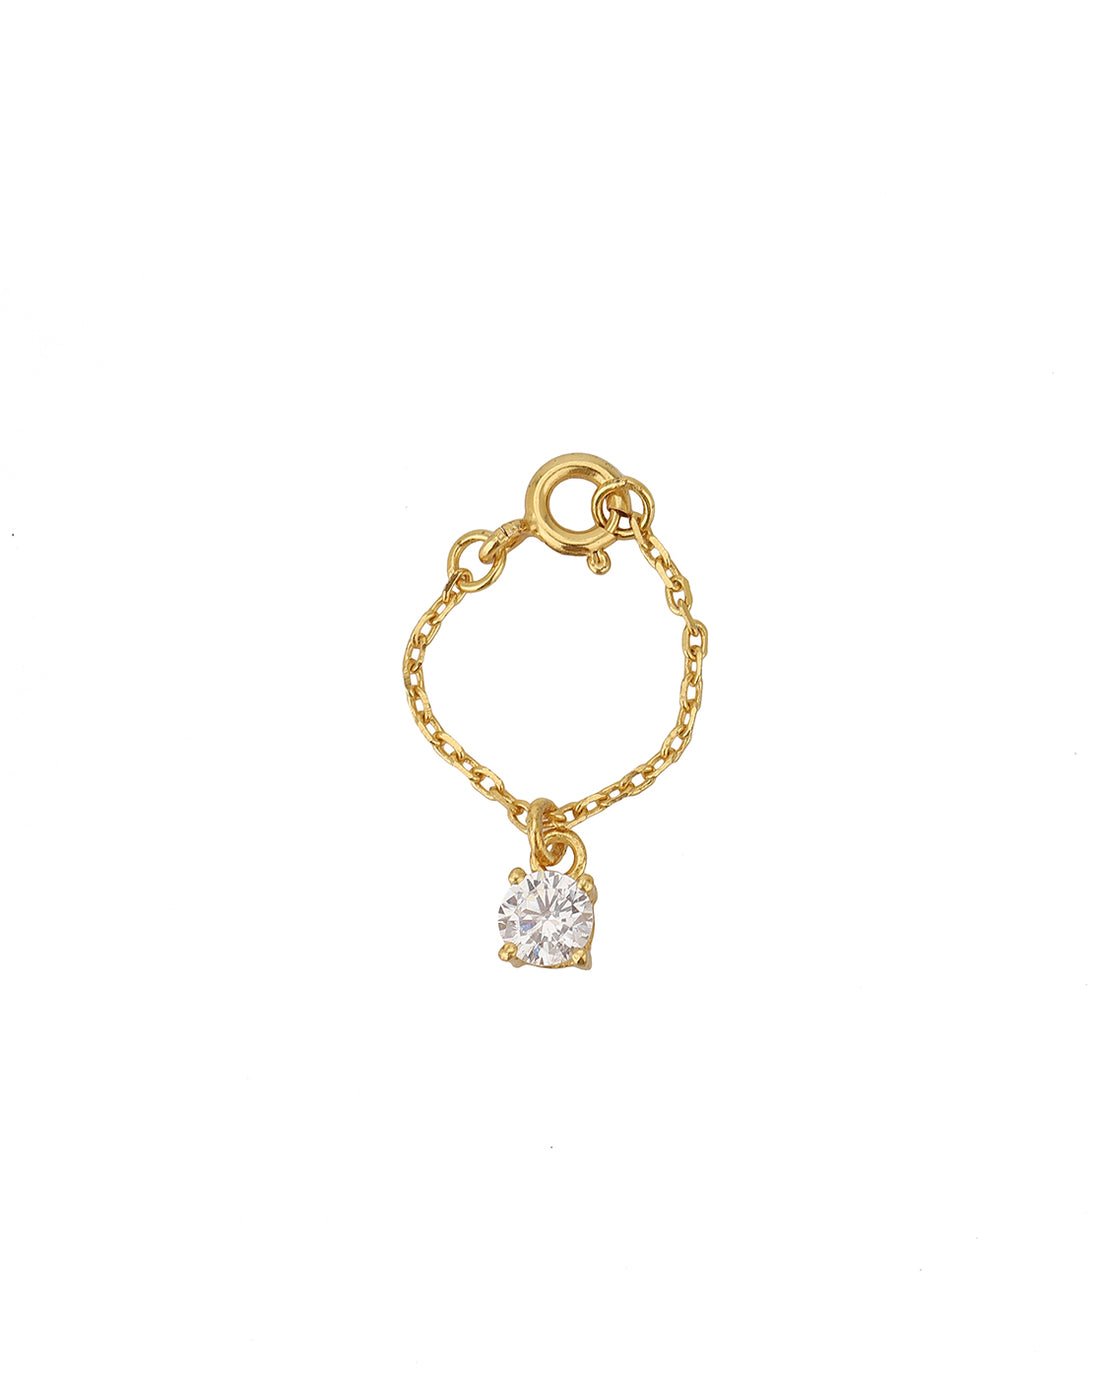 Carlton London Gold Plated Watch Charm With Dangling Round Solitaire Cz Studdedâ Stone For Women